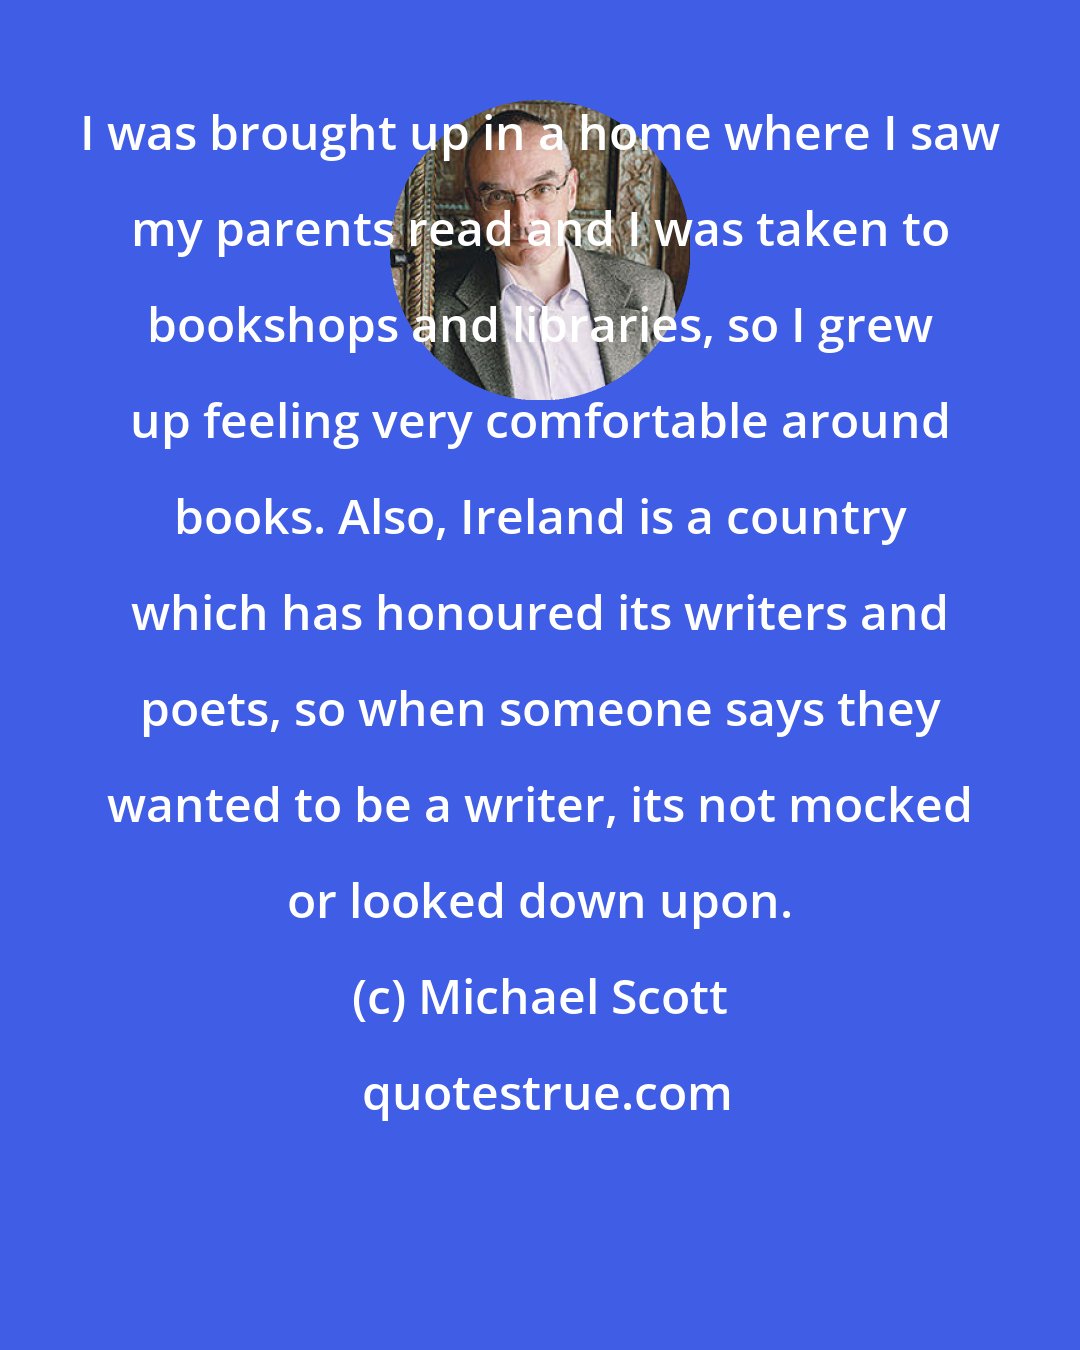 Michael Scott: I was brought up in a home where I saw my parents read and I was taken to bookshops and libraries, so I grew up feeling very comfortable around books. Also, Ireland is a country which has honoured its writers and poets, so when someone says they wanted to be a writer, its not mocked or looked down upon.